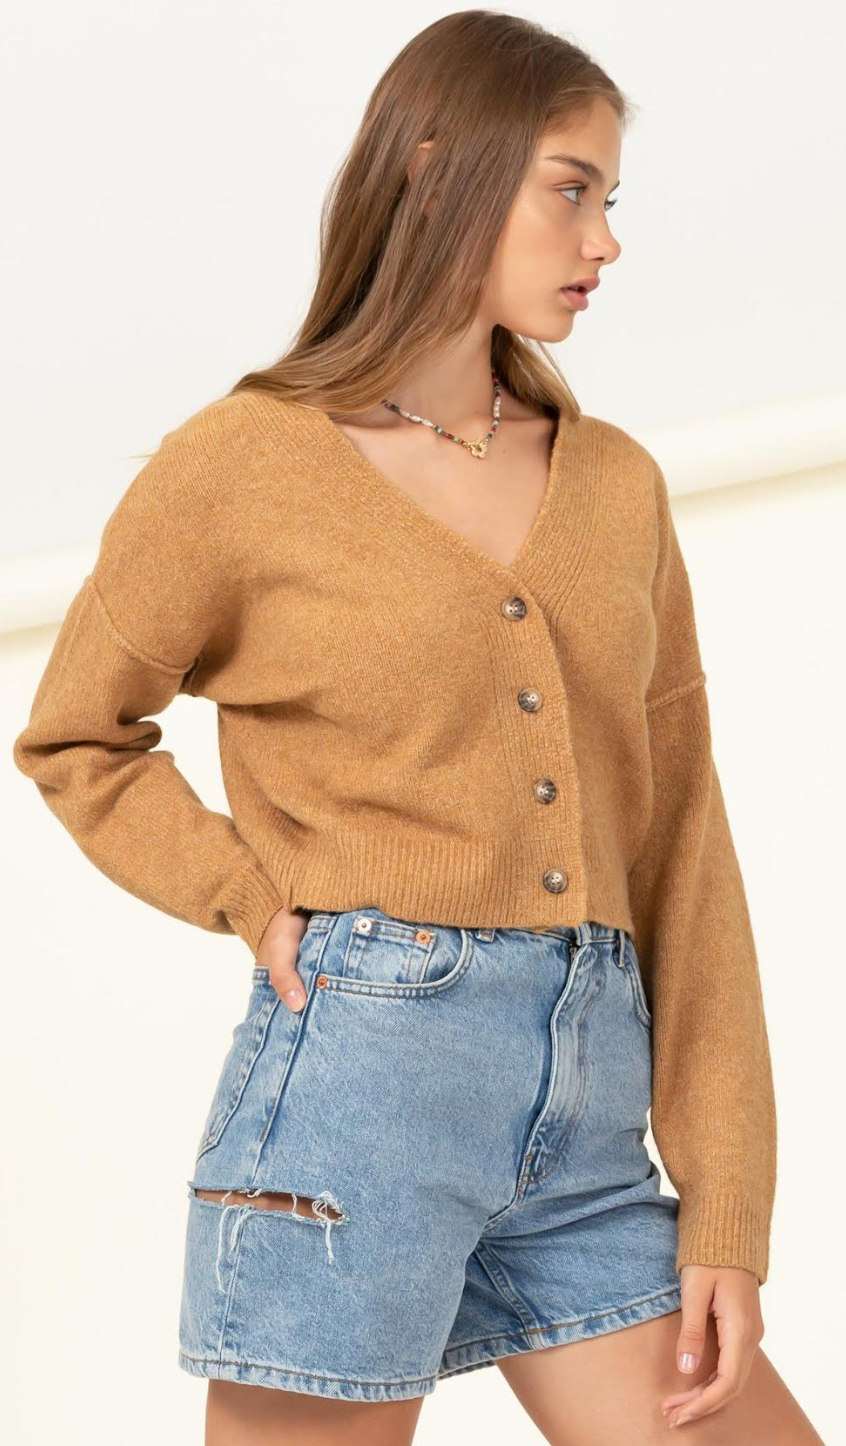 Easy Breezy Button-Up Cropped Cardigan - Brown Sugar